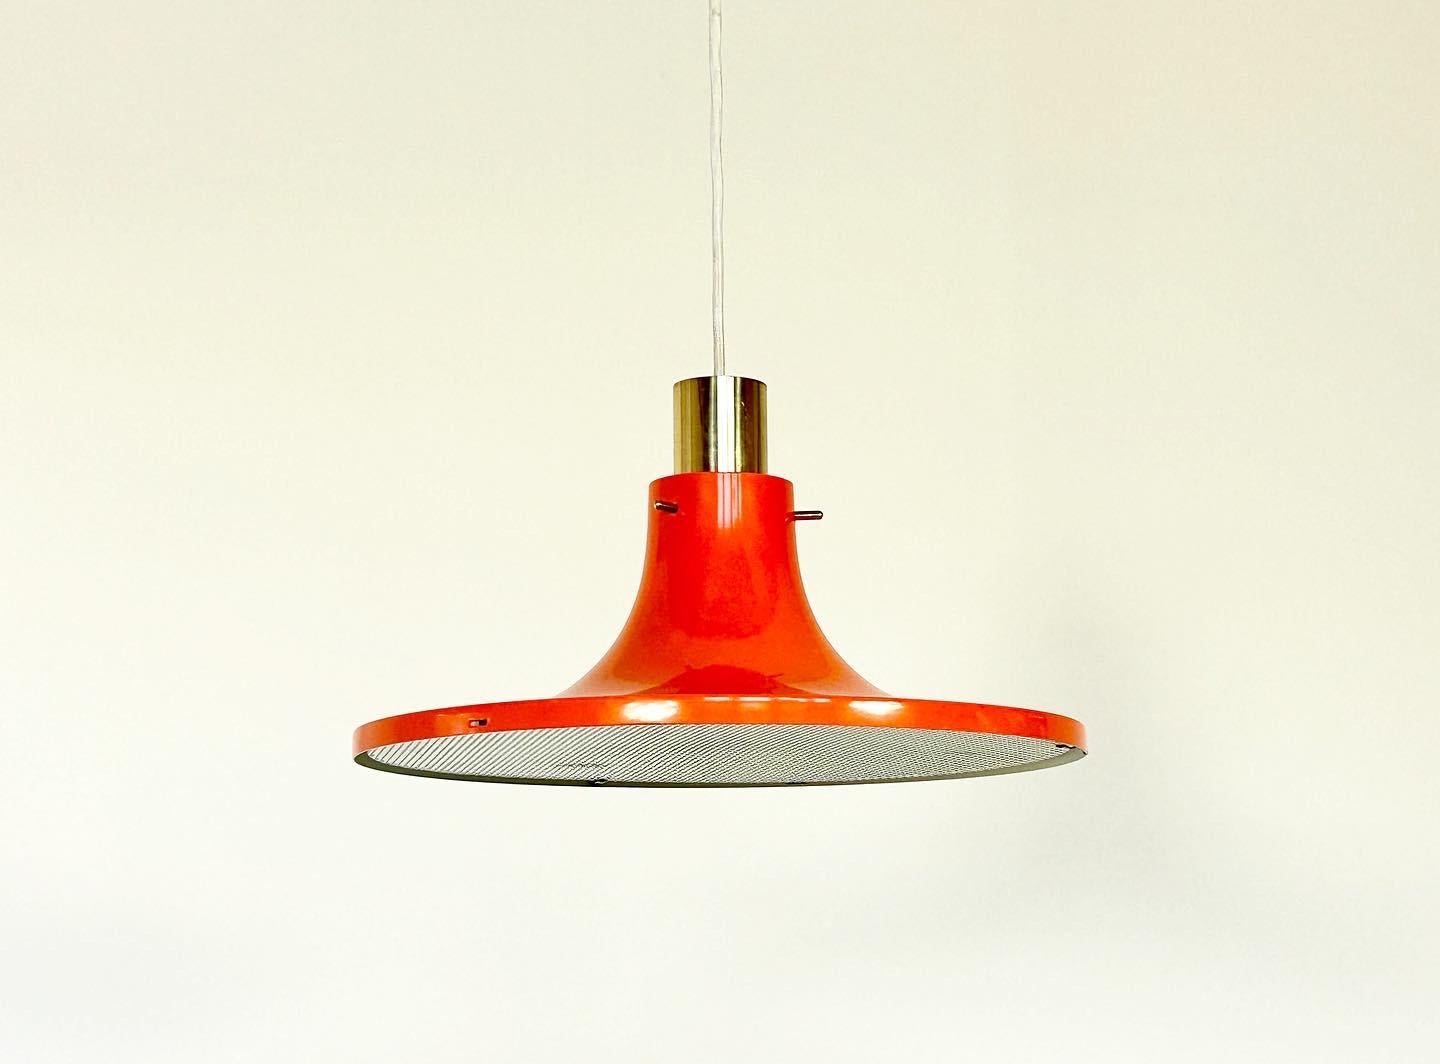 1960ies Laquered red-orange Pendant Lamp designed by Hans-Agne Jakobsson. 

Manufactured in Sweden by AB Markaryd, with makers bedge on inner side of the shield. 

Rare pendant lamp designed by Hans-Agne Jakobsson in brass and laquered metal, with